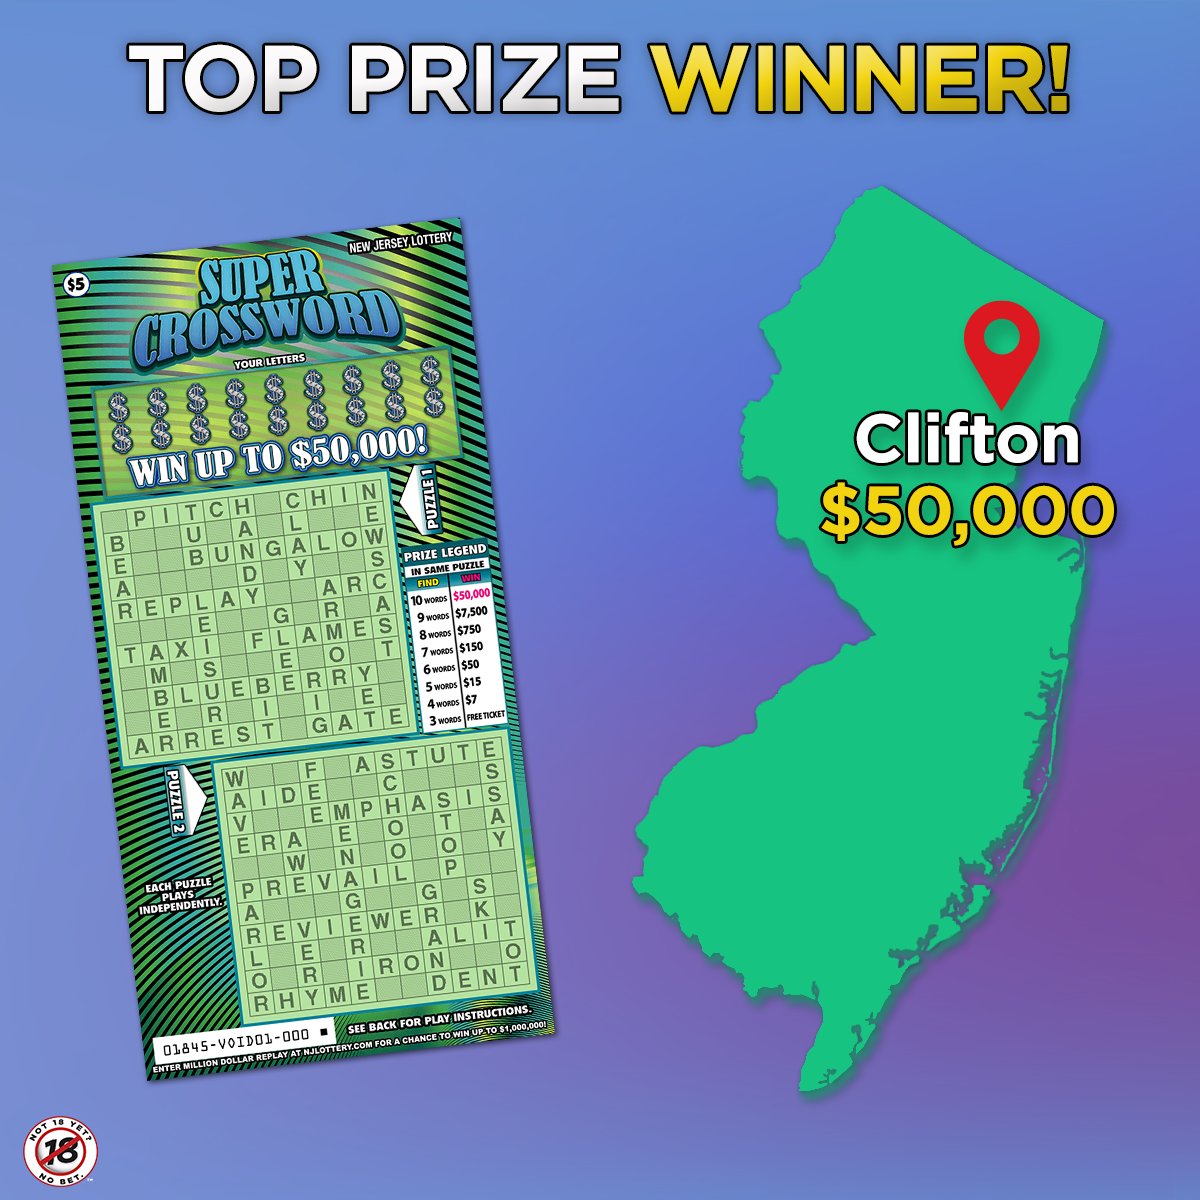 Congrats to this player who won $50,000 on a $5 Super Crossword Scratch-Off ticket. How would you celebrate winning 50k?! For Scratch-Offs game odds, visit NJLottery.com/ScratchOffs. #AnythingCanHappenInJersey